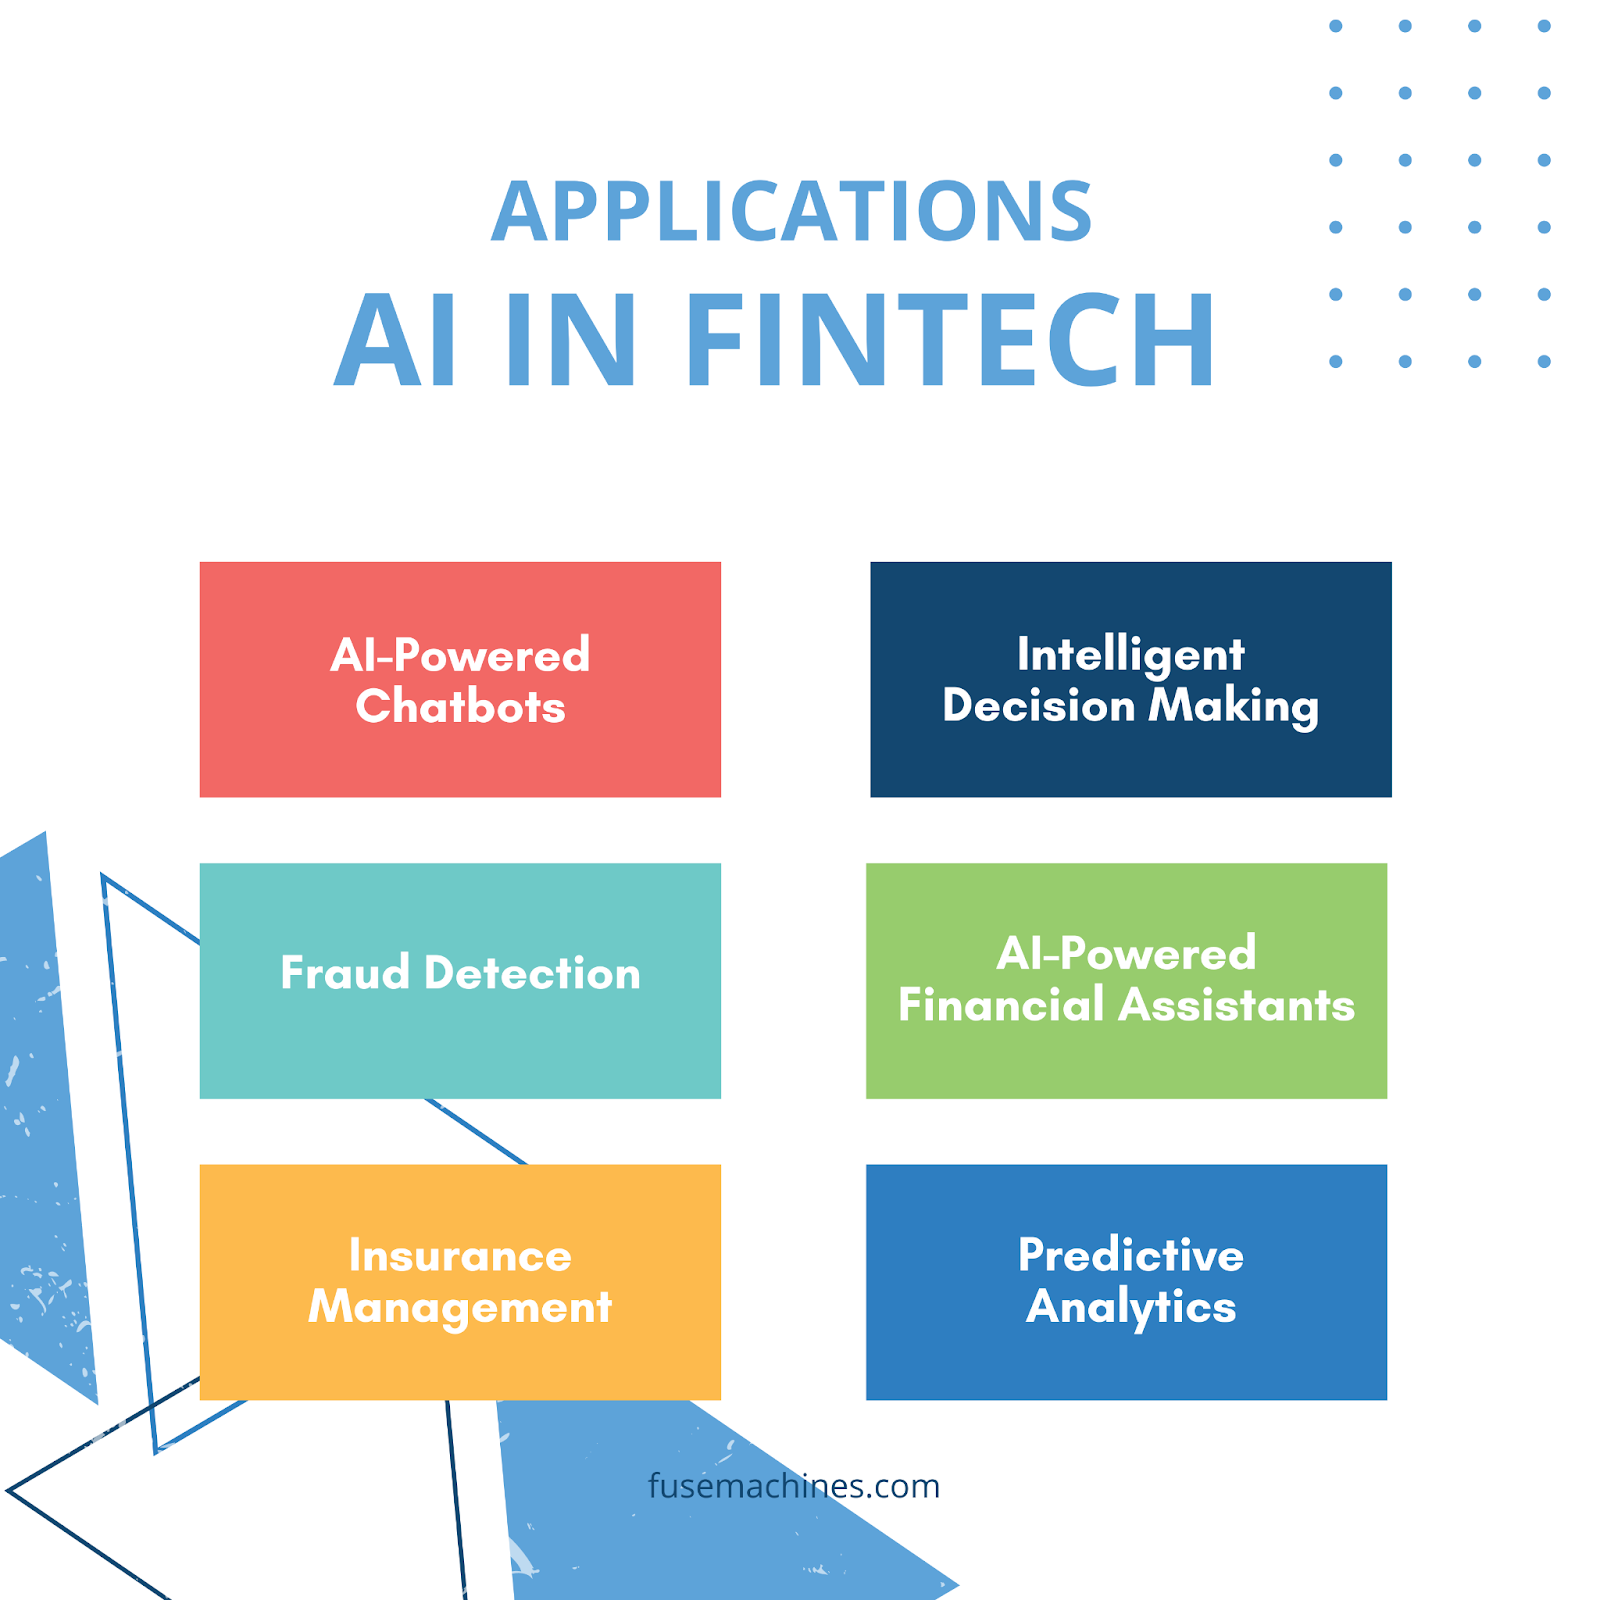 Applications of AI in fintech